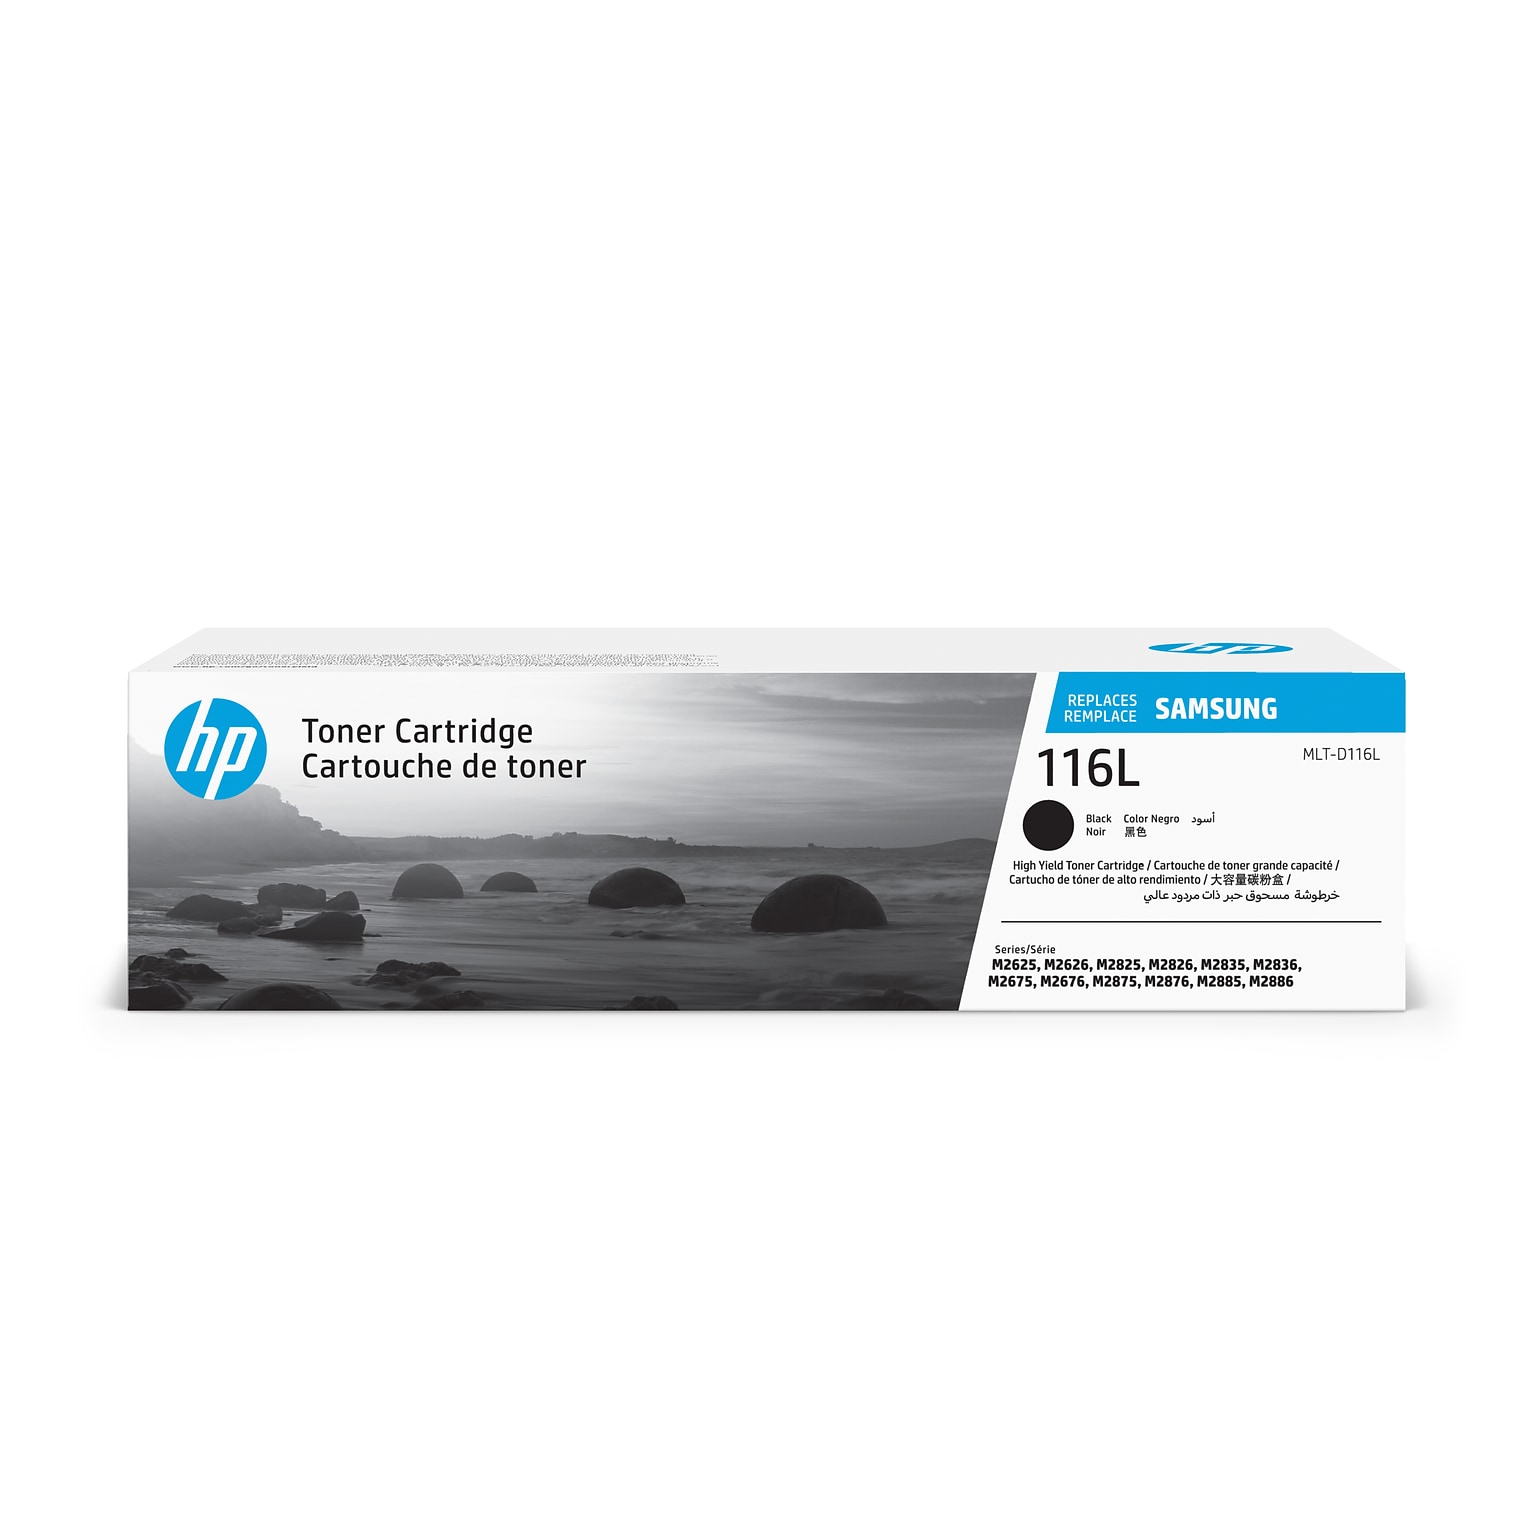 HP 116L Black High Yield Toner Cartridge for Samsung MLT-D116L (SU828),   Samsung-branded printer supplies are now HP-branded